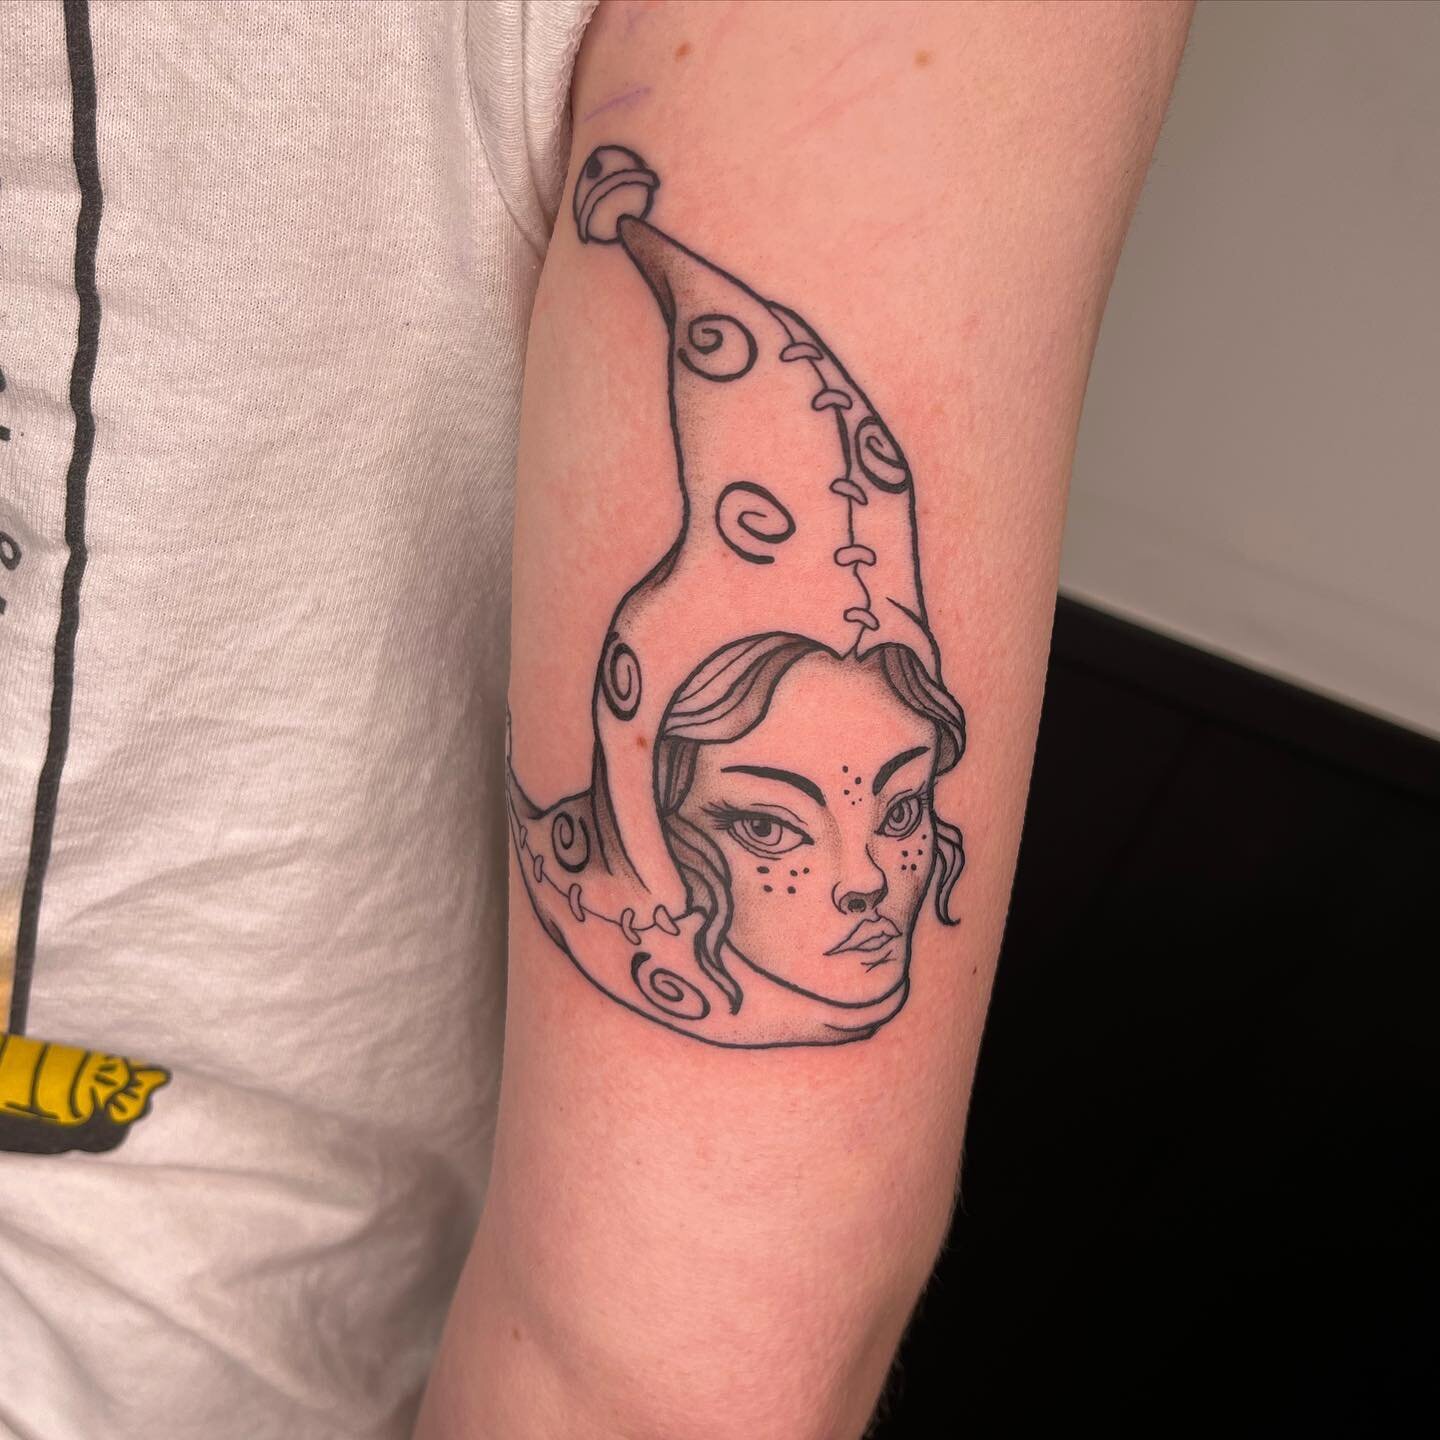 Moon jester done for Phoebe from my flash. Thanks for getting this design of us 🙏
.
.
For bookings DM us or at fallingswordtattoos@outlook.com